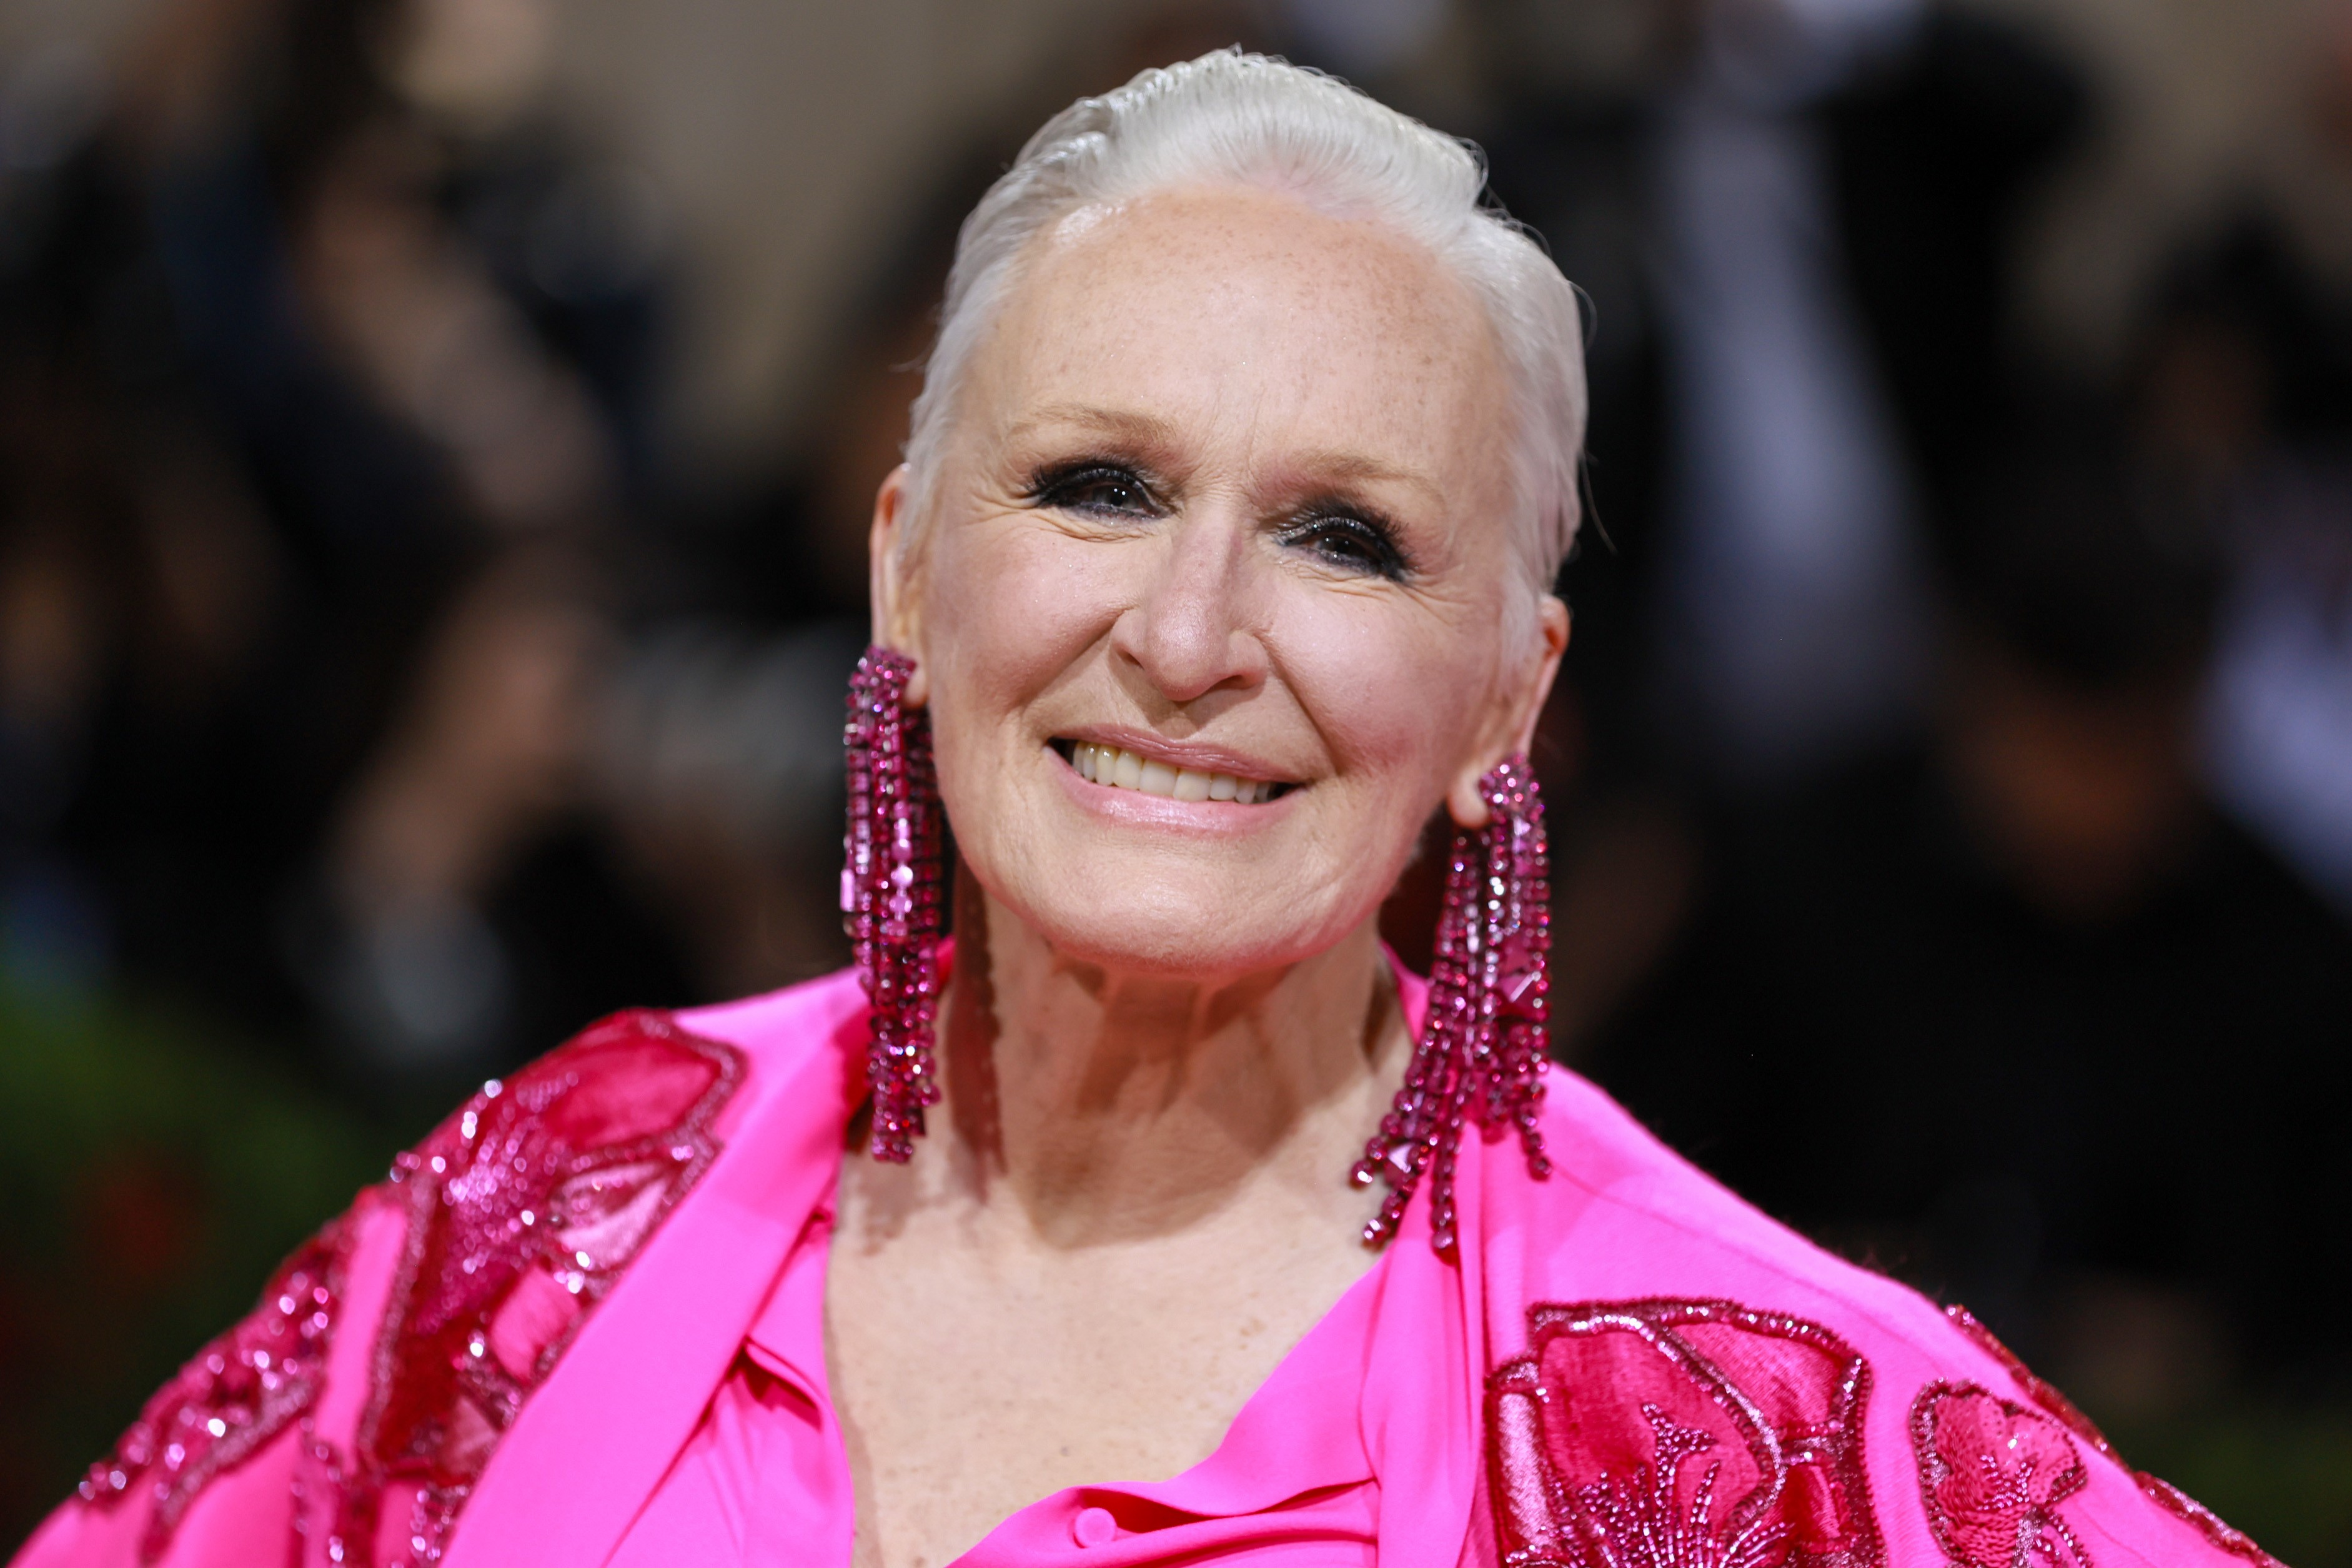 NEW YORK, NEW YORK - MAY 02: Glenn Close attends The 2022 Met Gala Celebrating "In America: An Anthology of Fashion" at The Metropolitan Museum of Art on May 02, 2022 in New York City. (Photo by Theo Wargo/WireImage) (Foto: WireImage)